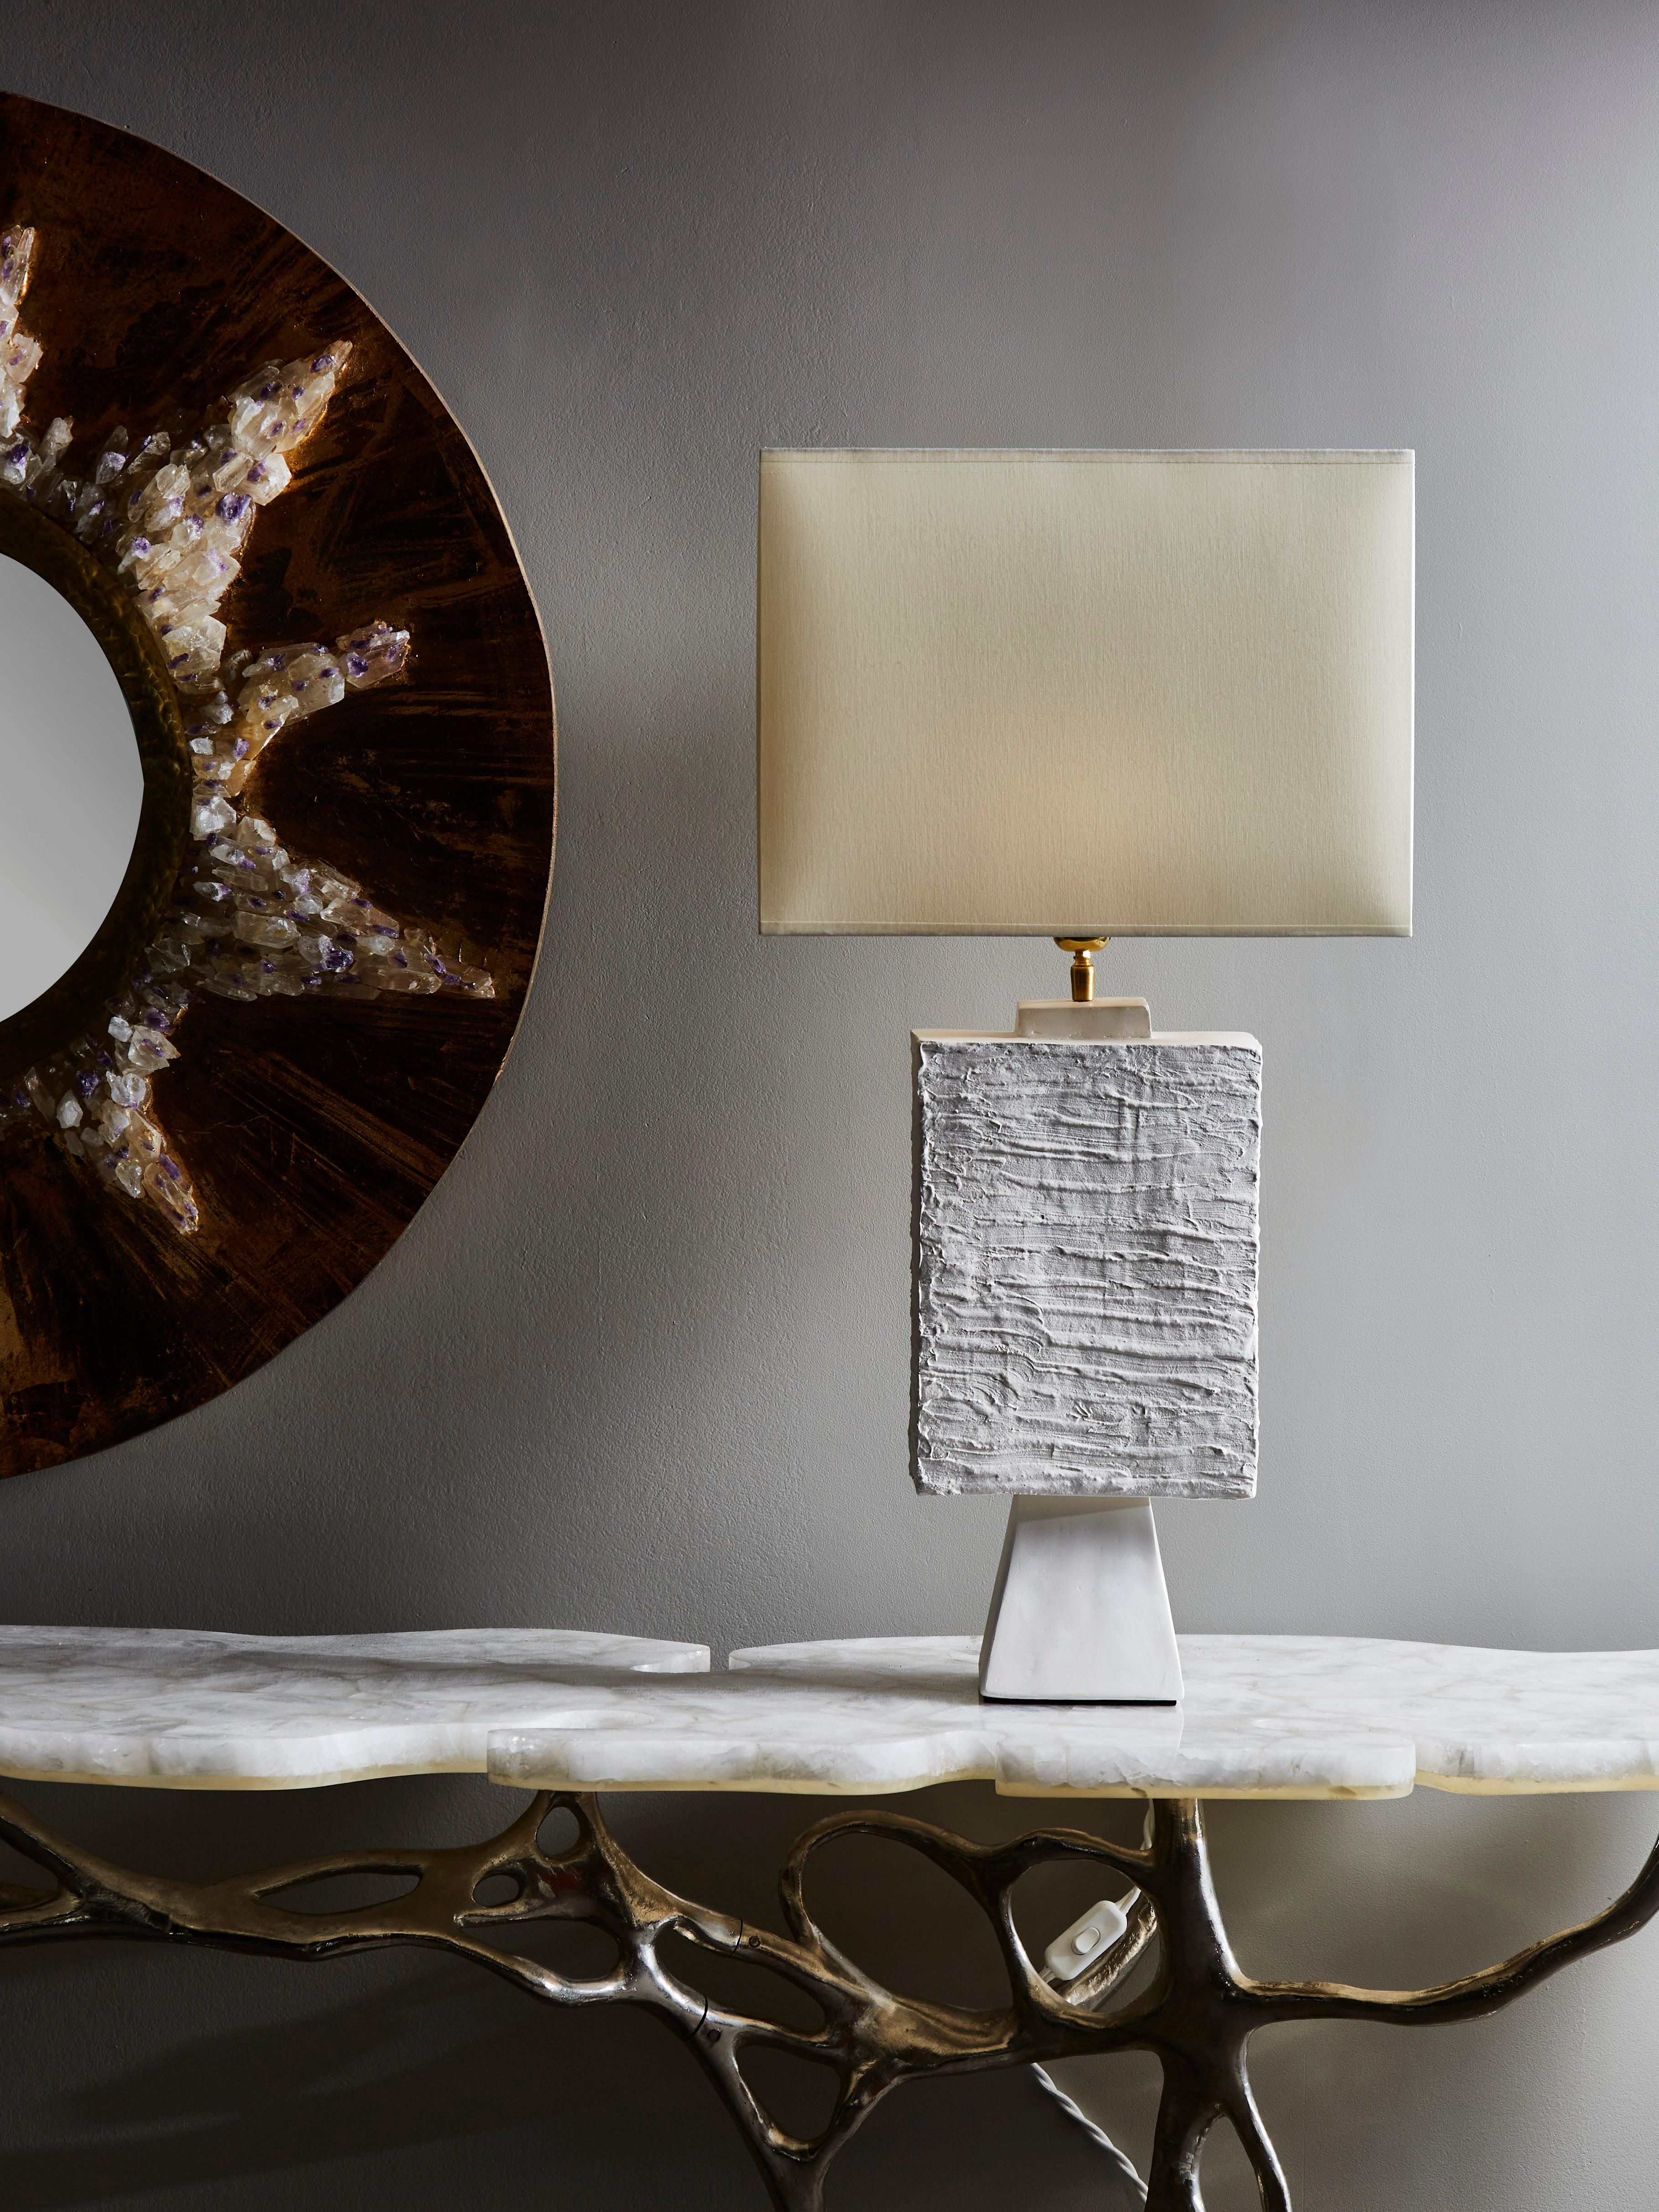 Pair of rectangle table lamps made of textured plaster and brass settings.

Contemporary work made in France.